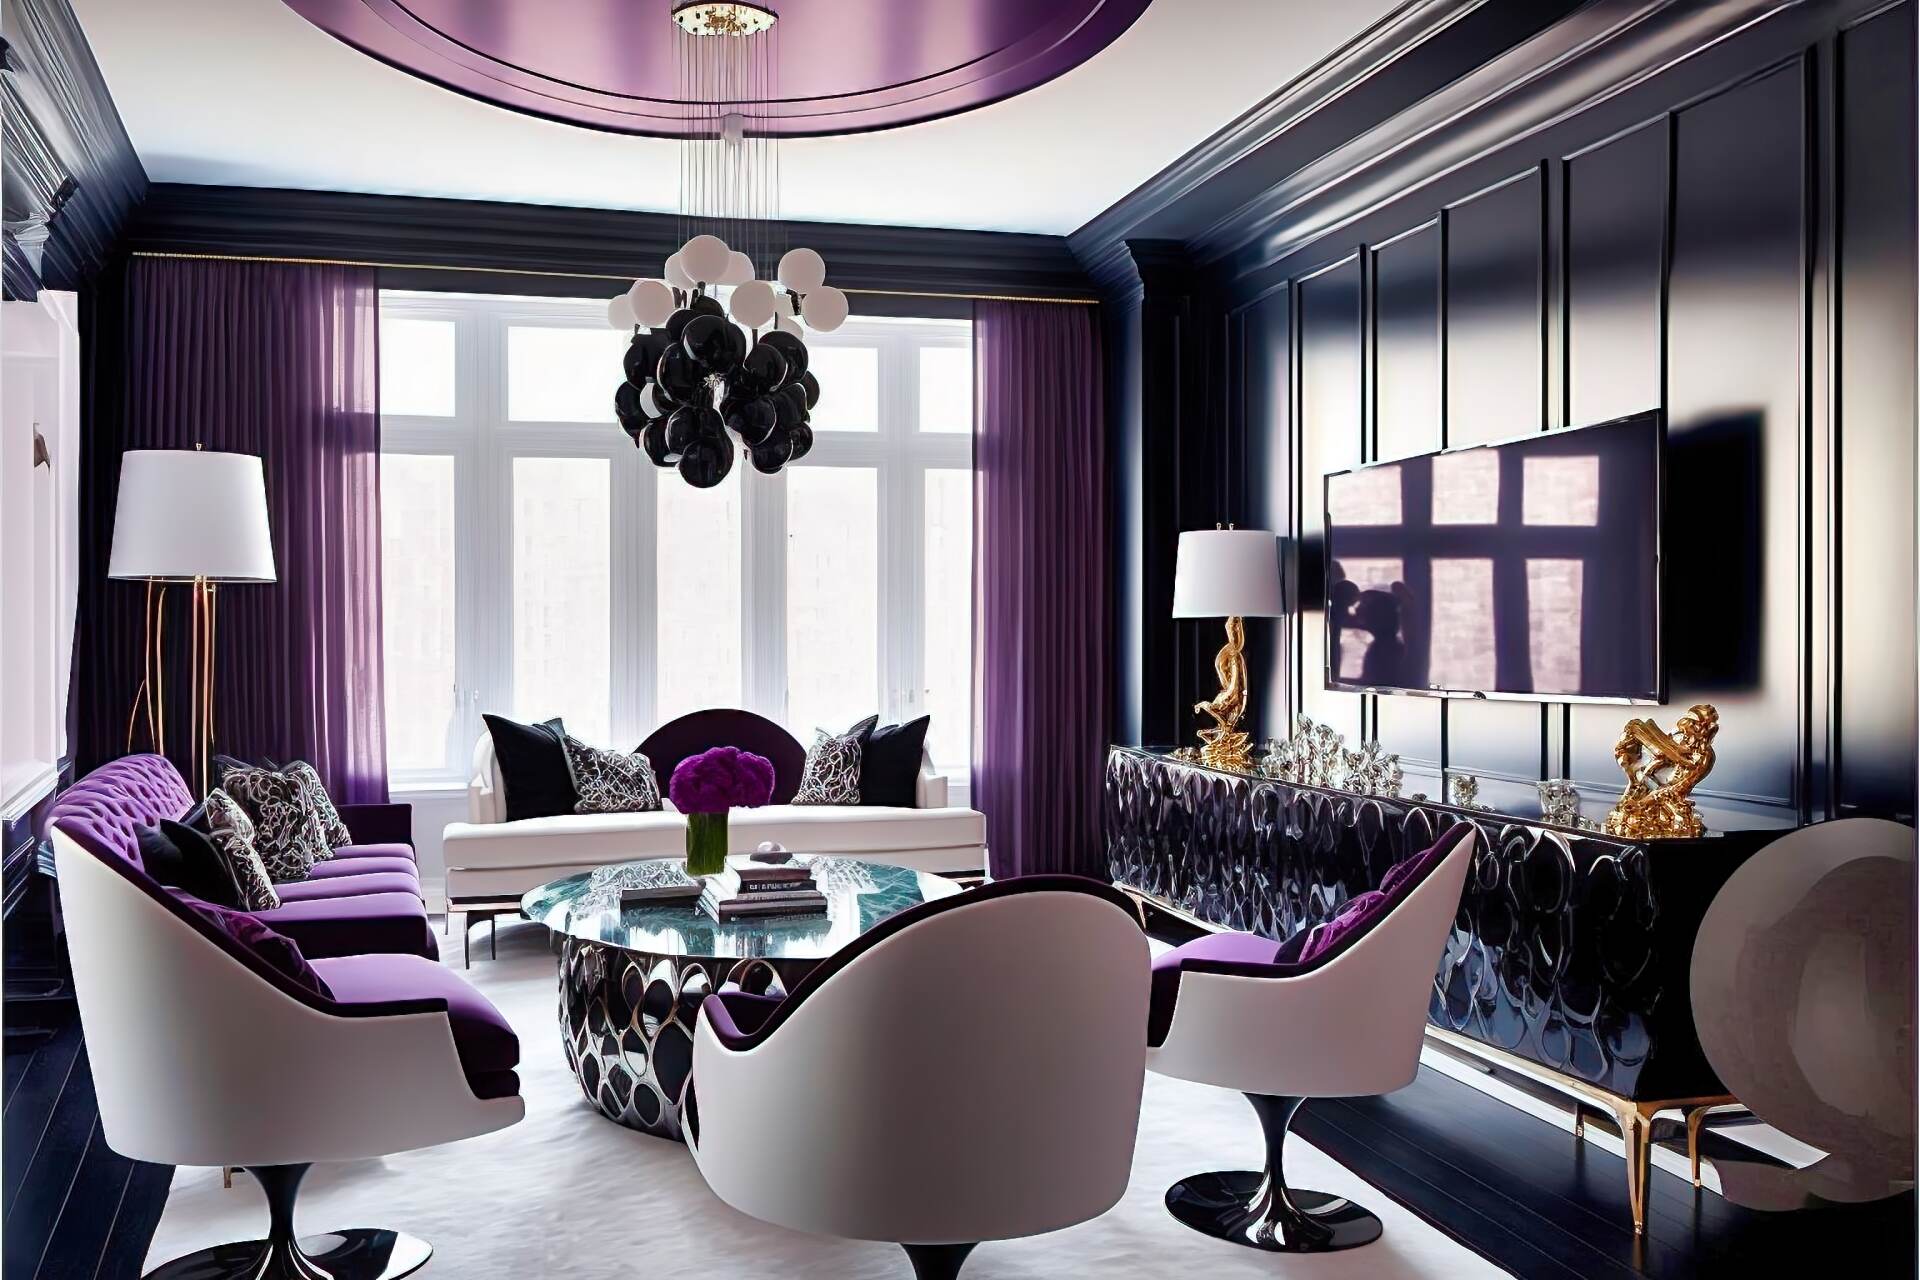 An Ultra-Glam Living Room With A Futuristic Vibe. The Walls Are Painted A Deep Purple, With A Large, Flat-Screen Tv Mounted On One Wall. A Sleek, Black Sofa Is Paired With Two White Armchairs For Plenty Of Seating. A Black Marble Coffee Table And Purple Accent Chair Complete The Look. A Large White Chandelier Hangs From The Ceiling, Adding A Touch Of Glamour.